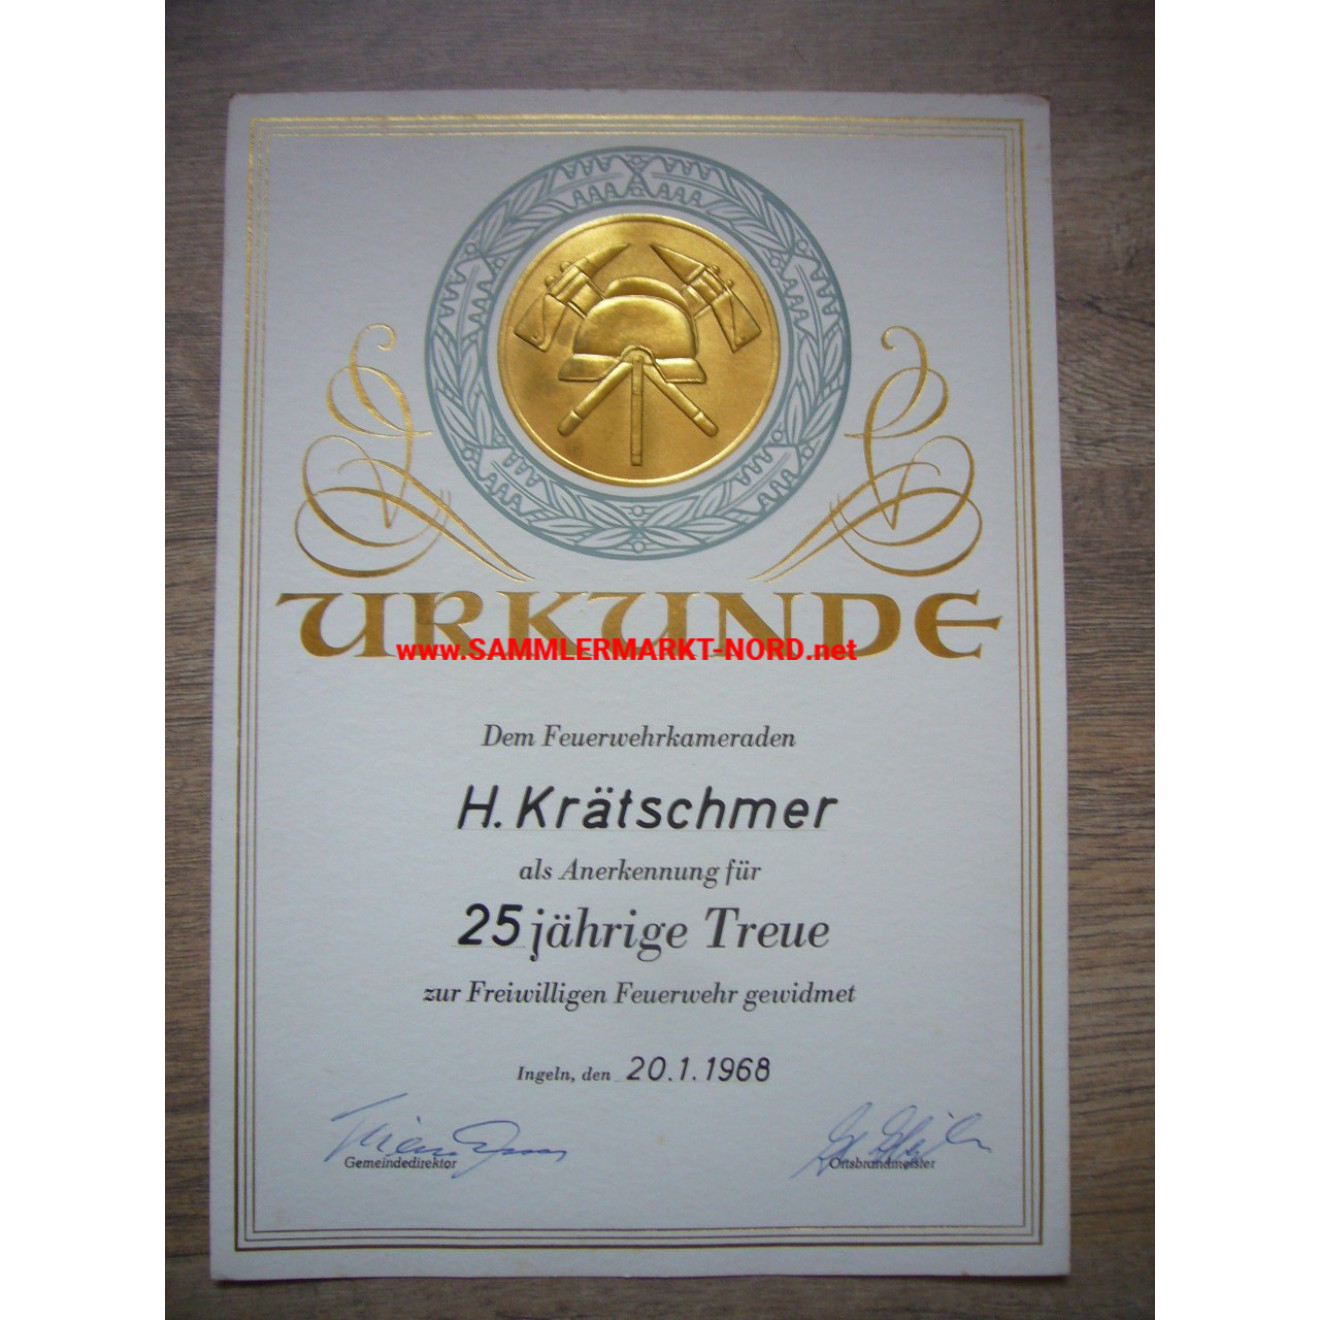 Voluntary Fire Brigade Ingeln - Certificate of Appreciation for 25 years of service